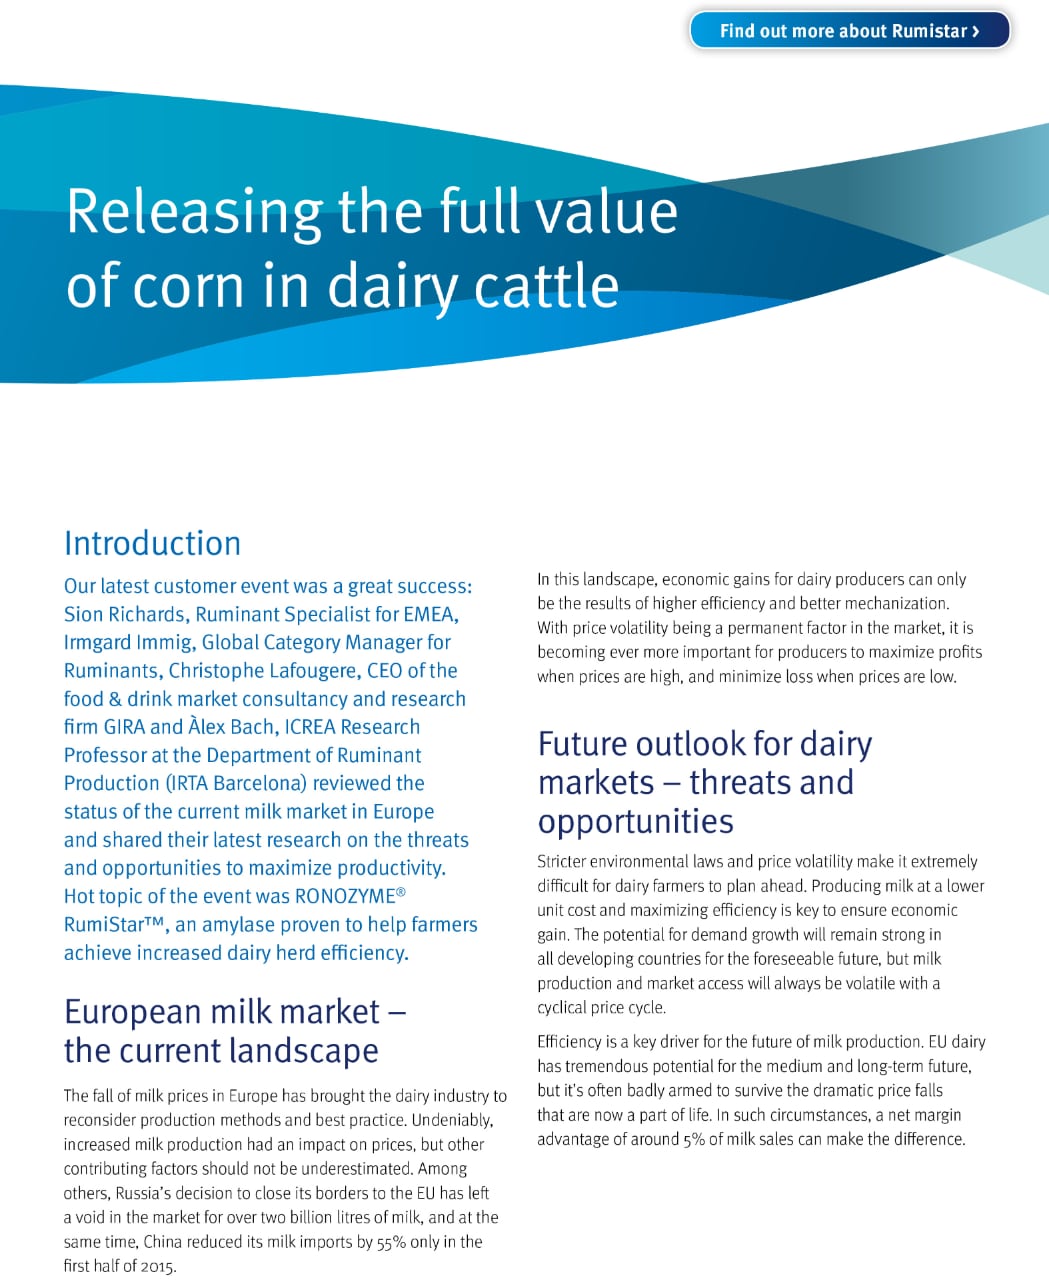 Releasing the full value of corn in dairy cattle